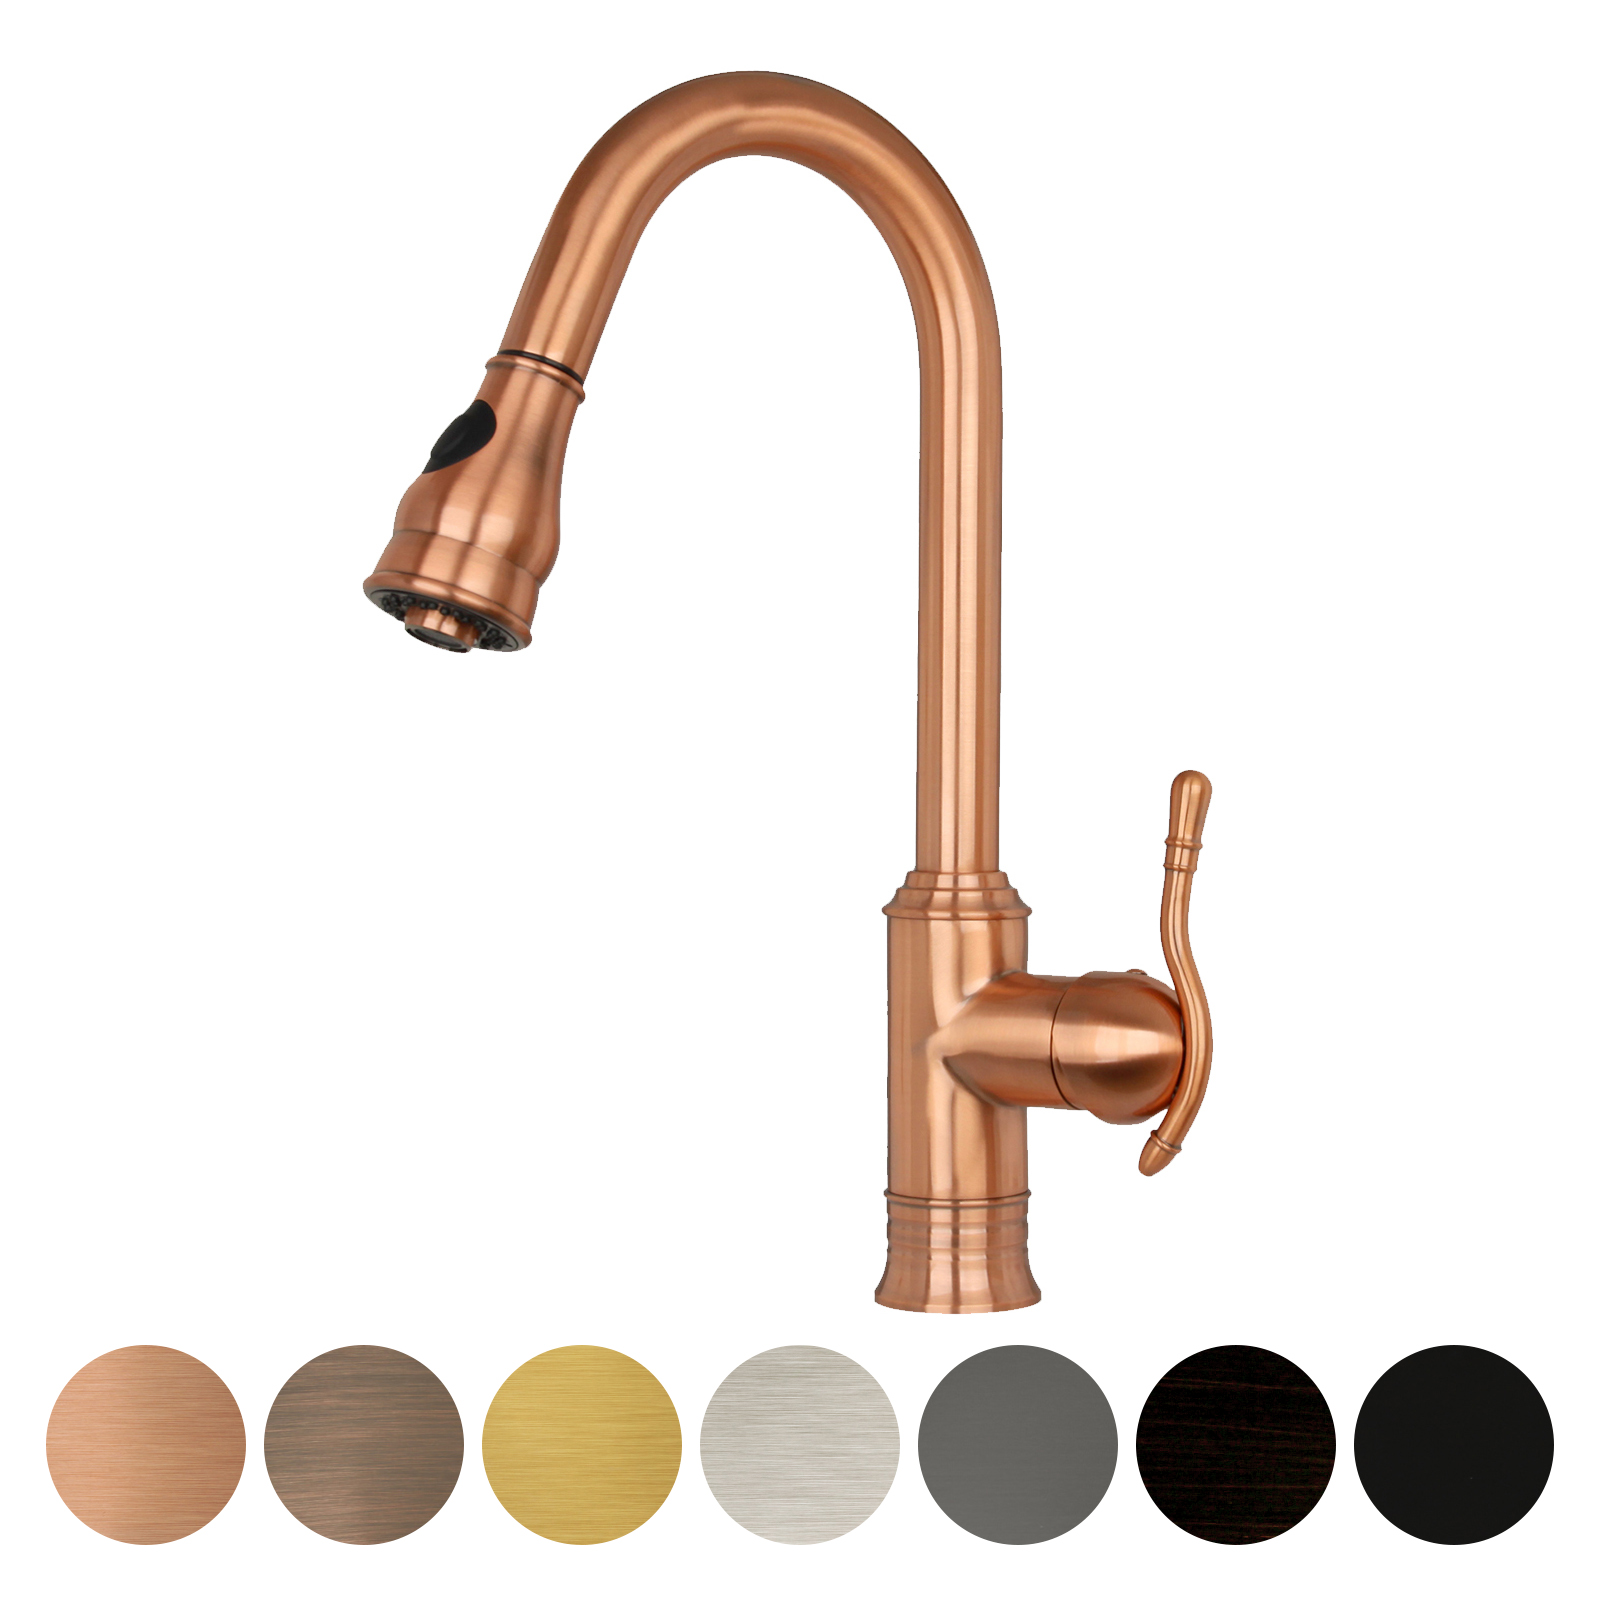 Copper Pre-Rinse Spring Kitchen Faucet, Single Level Solid Brass Kitchen Sink Faucets with Pull Down Sprayer